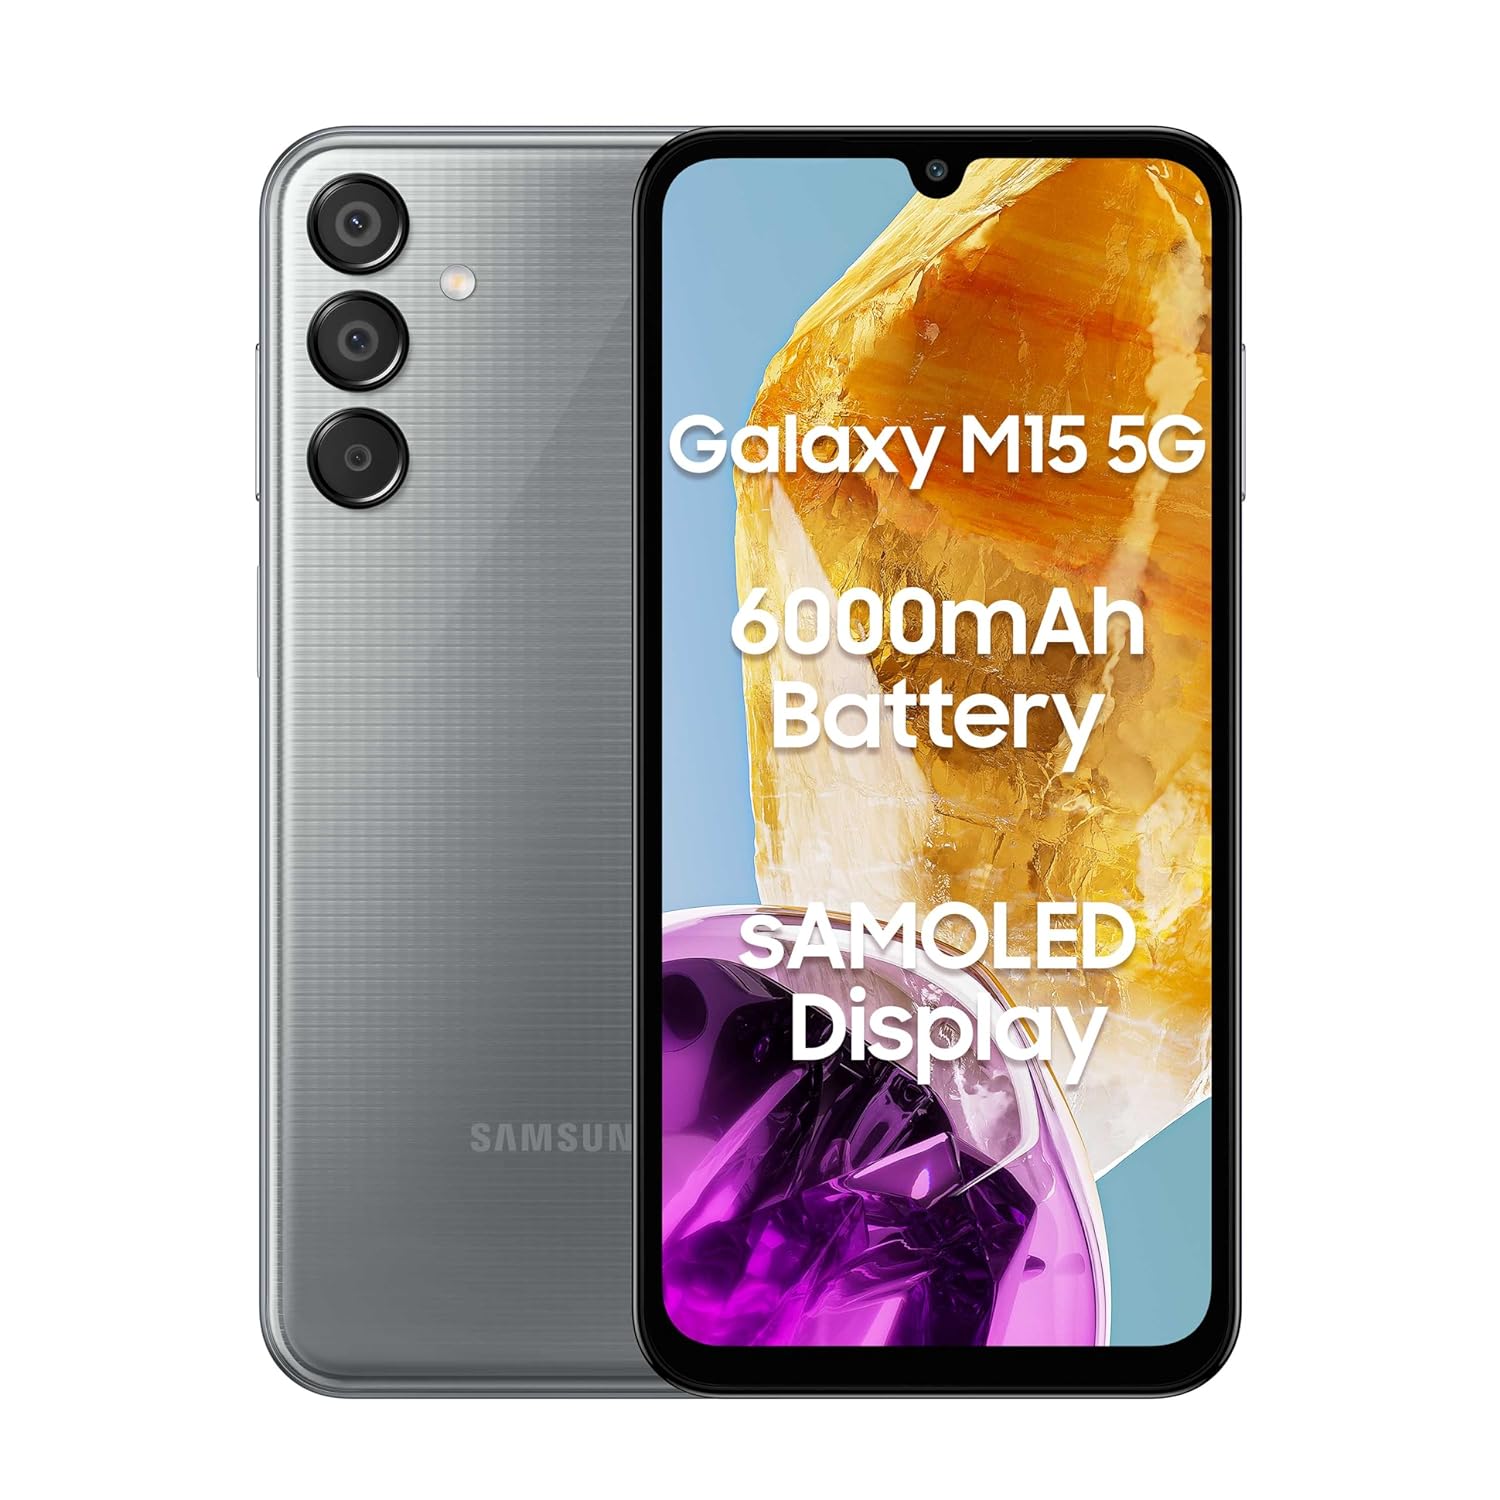 Samsung Galaxy M15 5G (Stone Grey,6GB RAM,128GB Storage)| 50MP Triple Cam| 6000mAh Battery| MediaTek Dimensity 6100+| 4 Gen. OS Upgrade & 5 Year Security Update| Super AMOLED Display| Without Charger